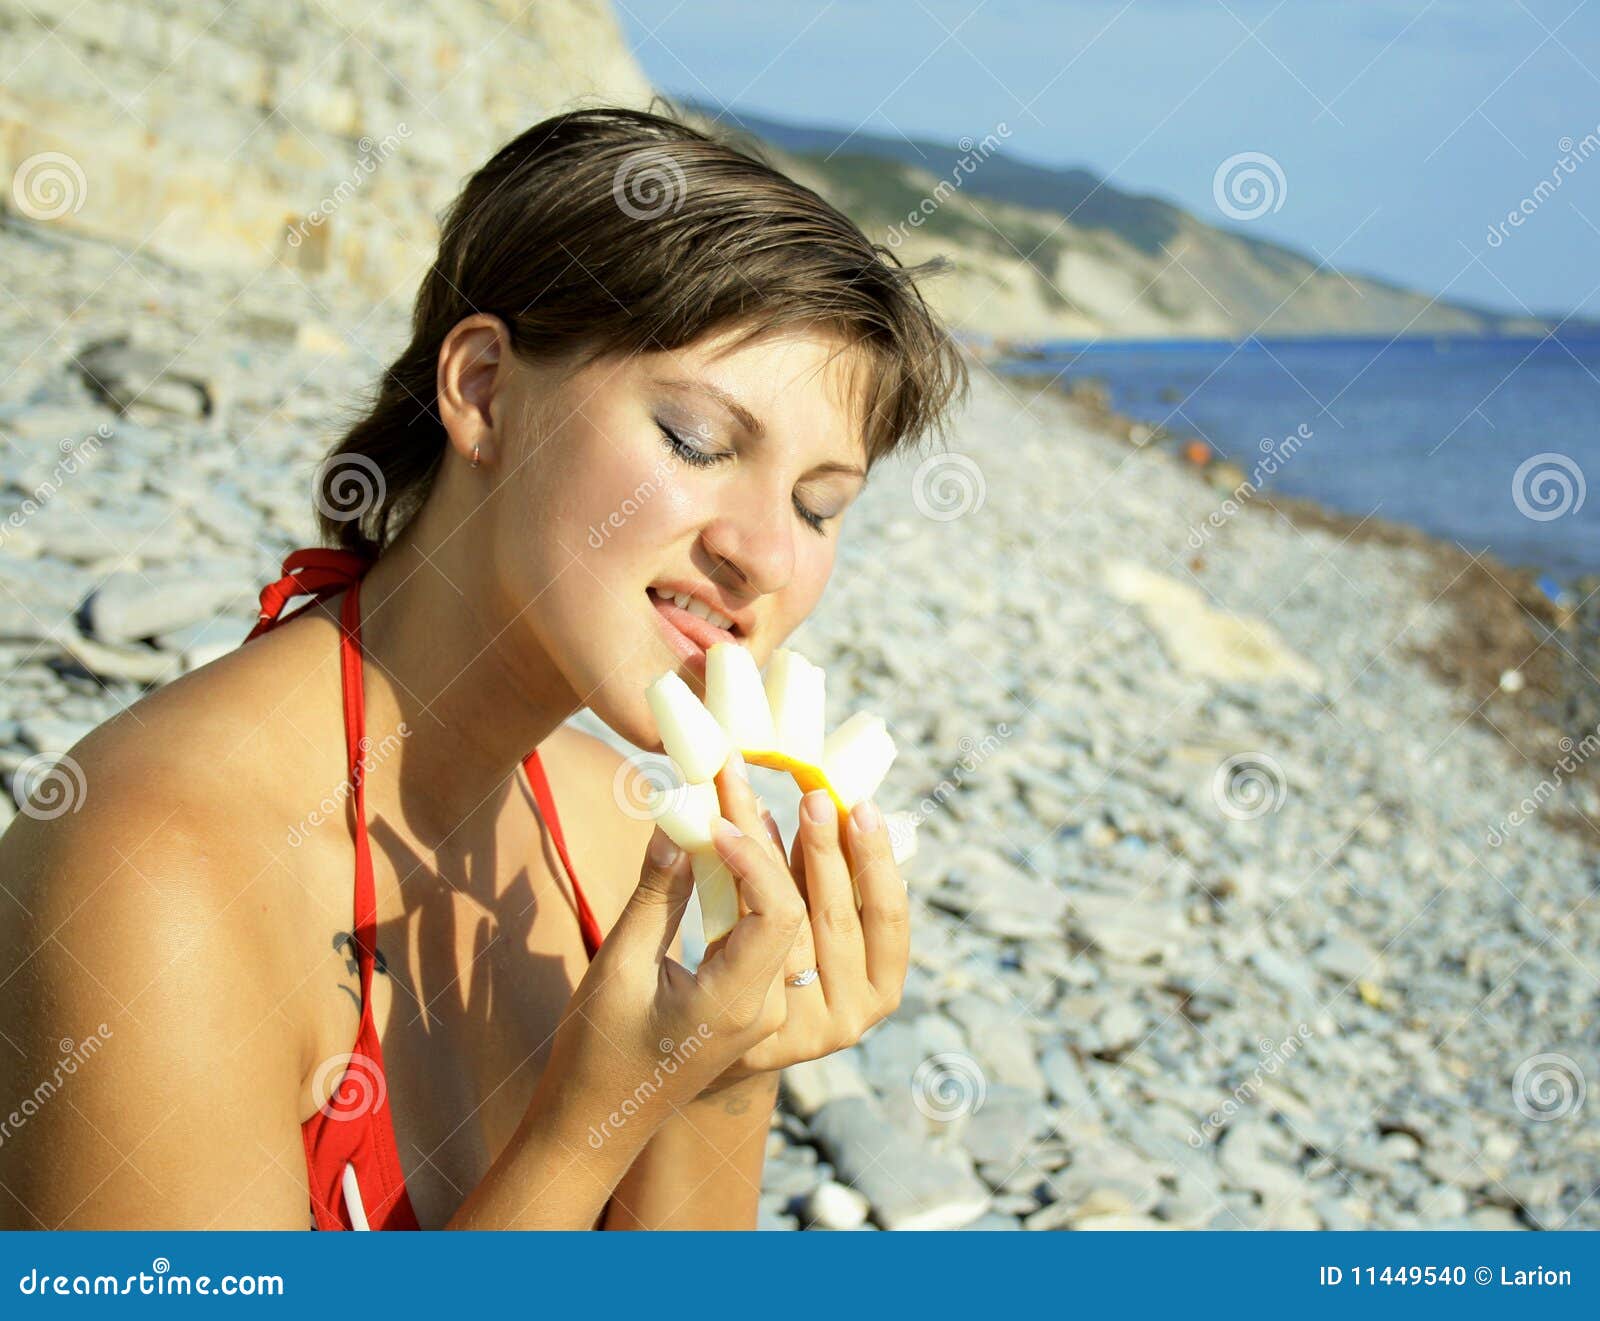 Young Girl Eats Melon Stock Photo Image Of Relaxation 114